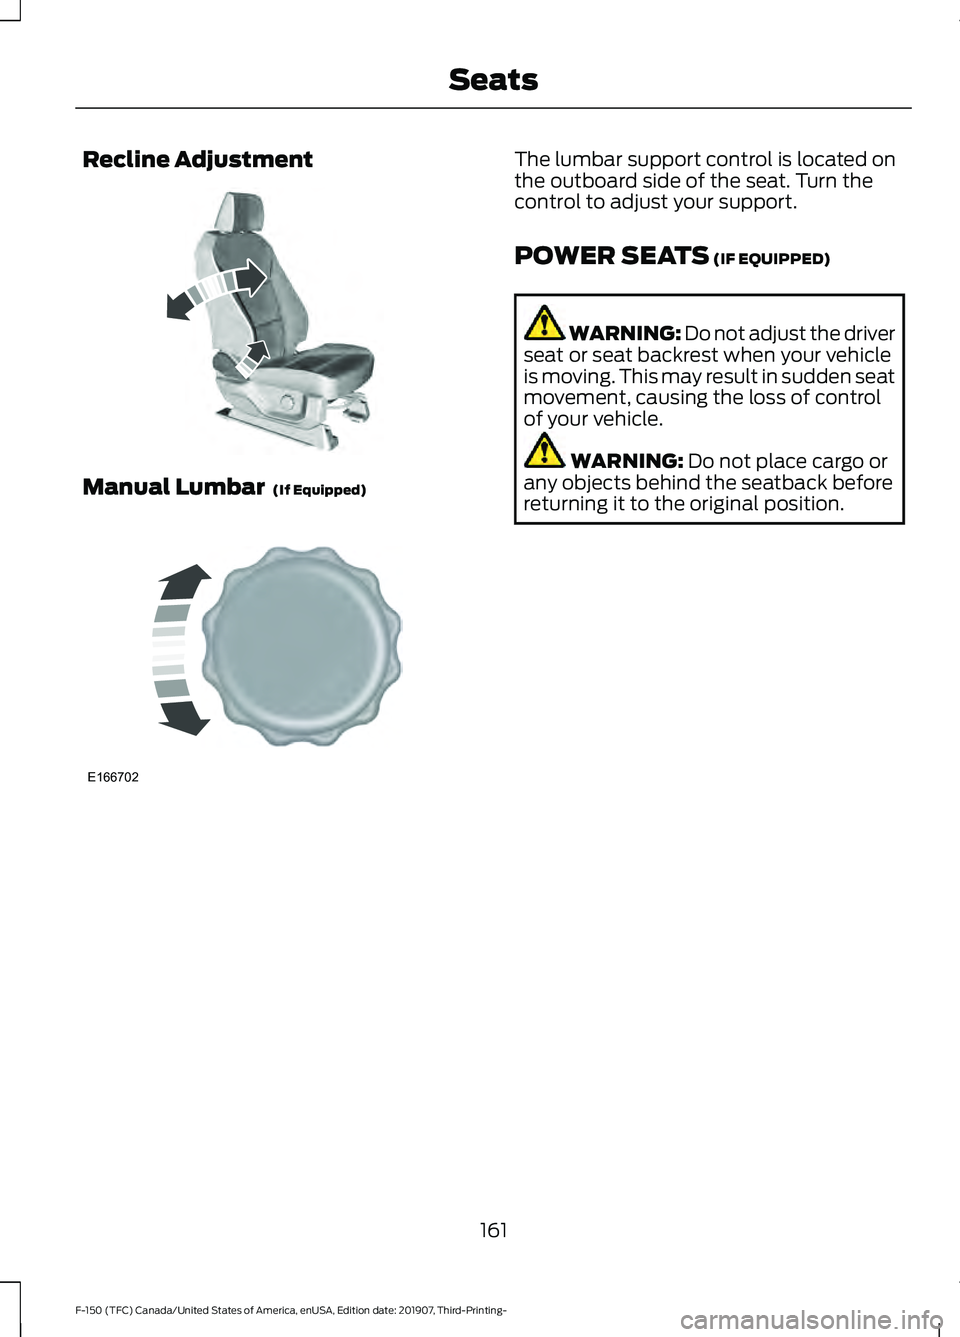 FORD F-150 2020  Owners Manual Recline Adjustment
Manual Lumbar  (If Equipped) The lumbar support control is located on
the outboard side of the seat. Turn the
control to adjust your support.
POWER SEATS
 (IF EQUIPPED)
WARNING: Do 